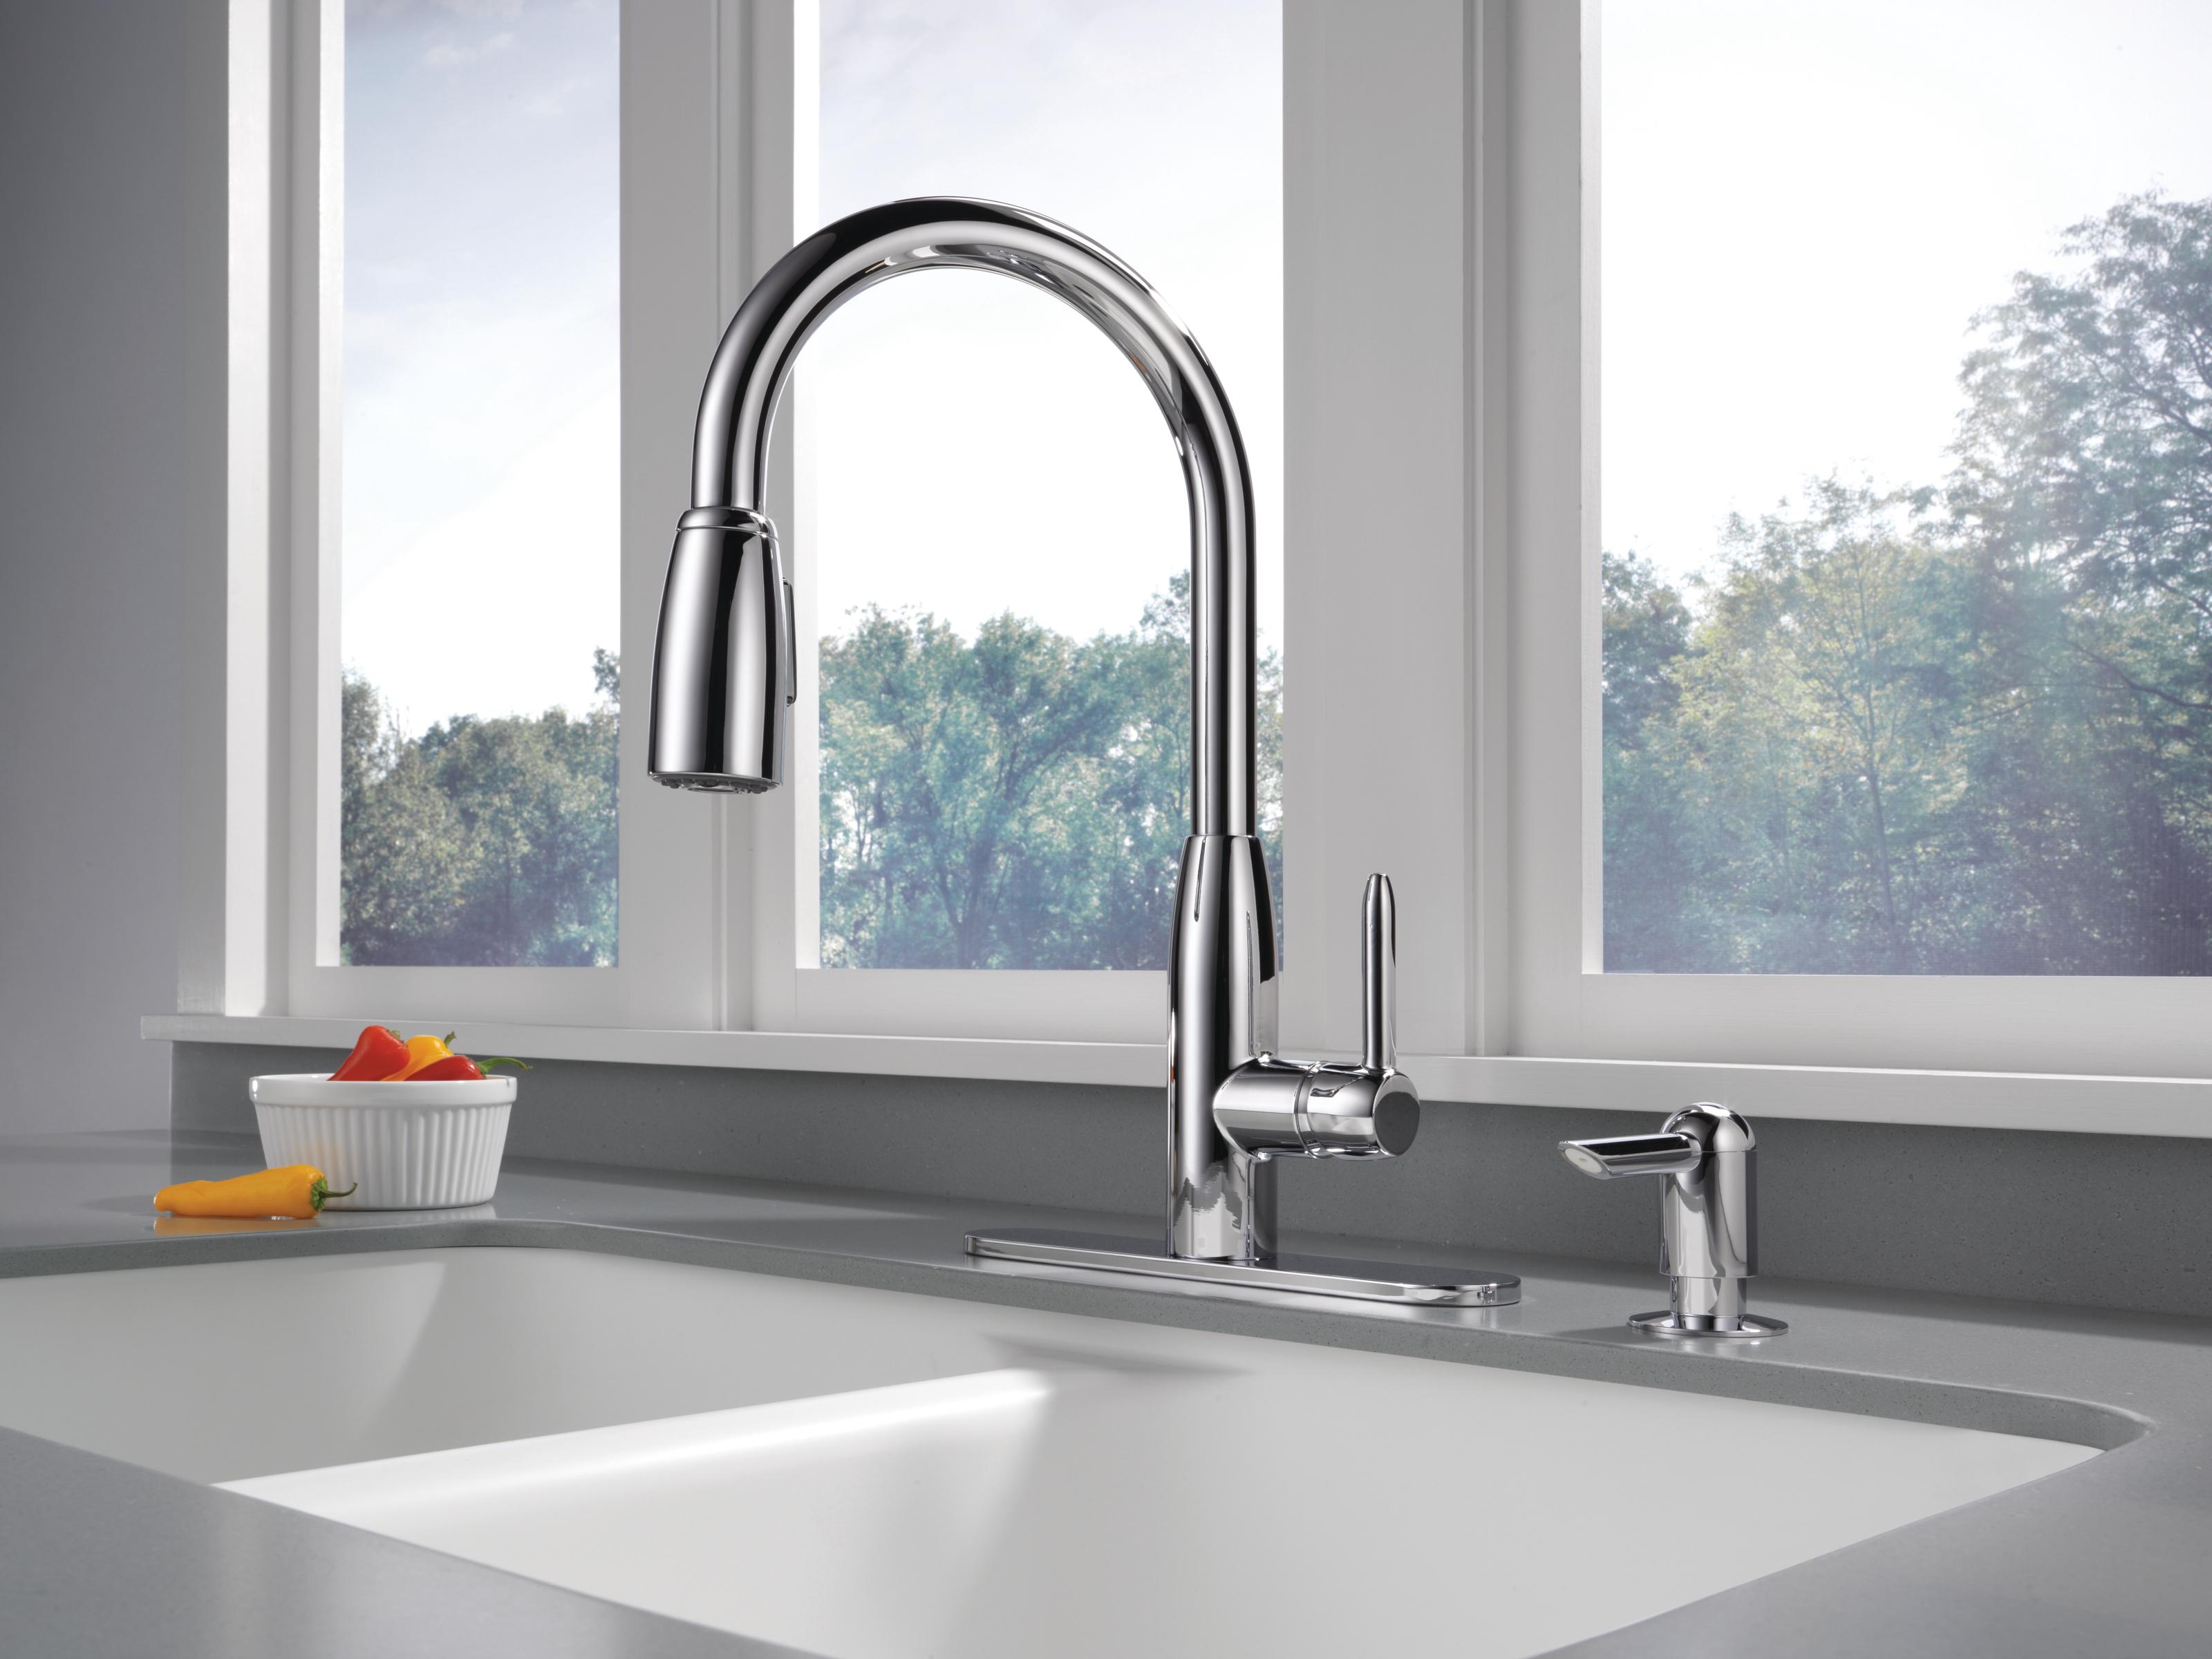 Peerless Core Kitchen Single Handle Pull-Down Faucet in Chrome P88103LF-SD-L - image 10 of 11